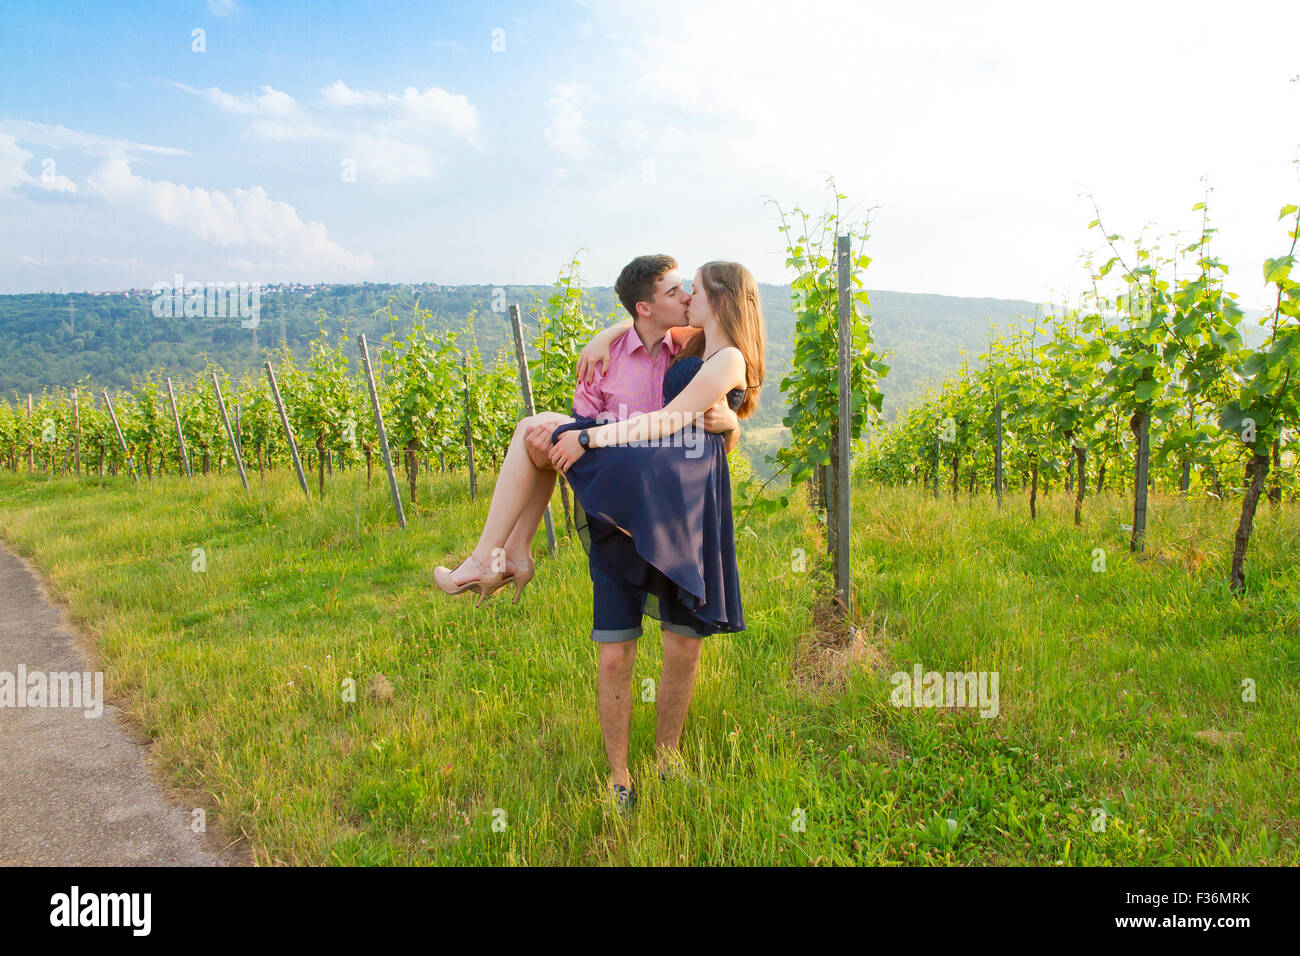 Young kissing love couple in a vineyard Stock Photo